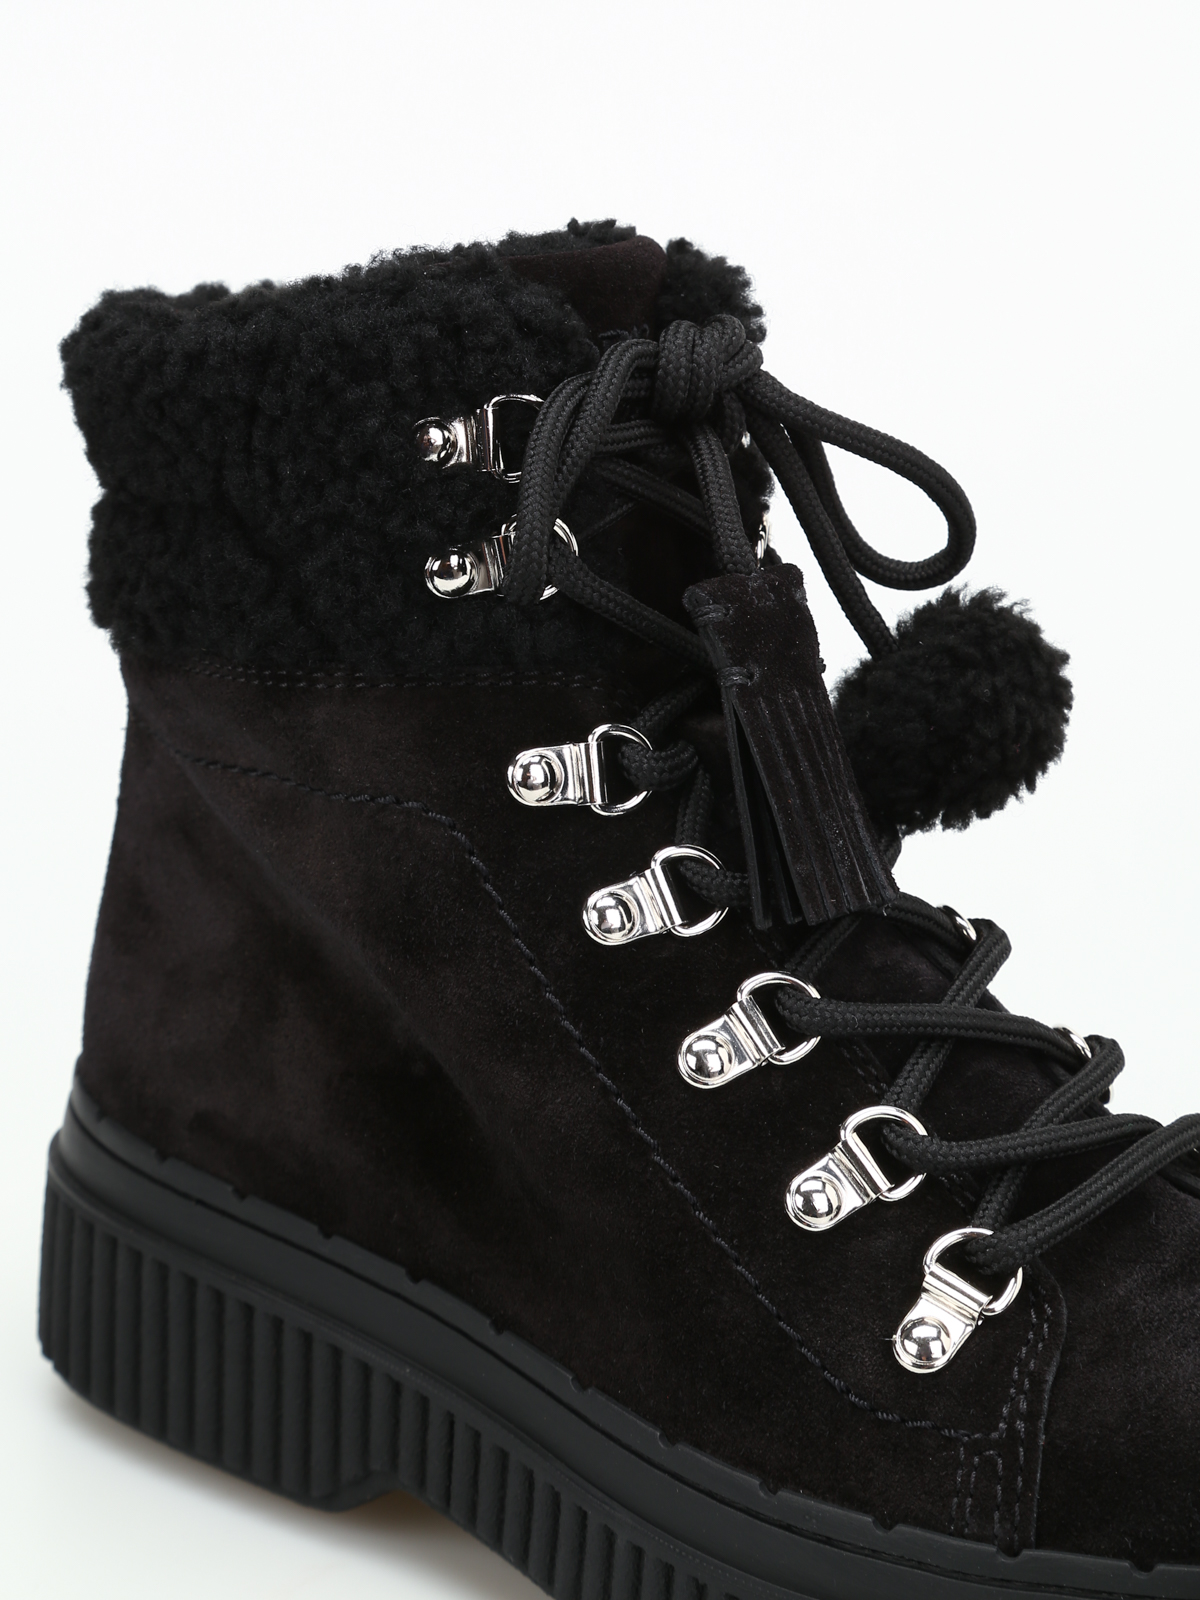 Black suede and shearling booties 